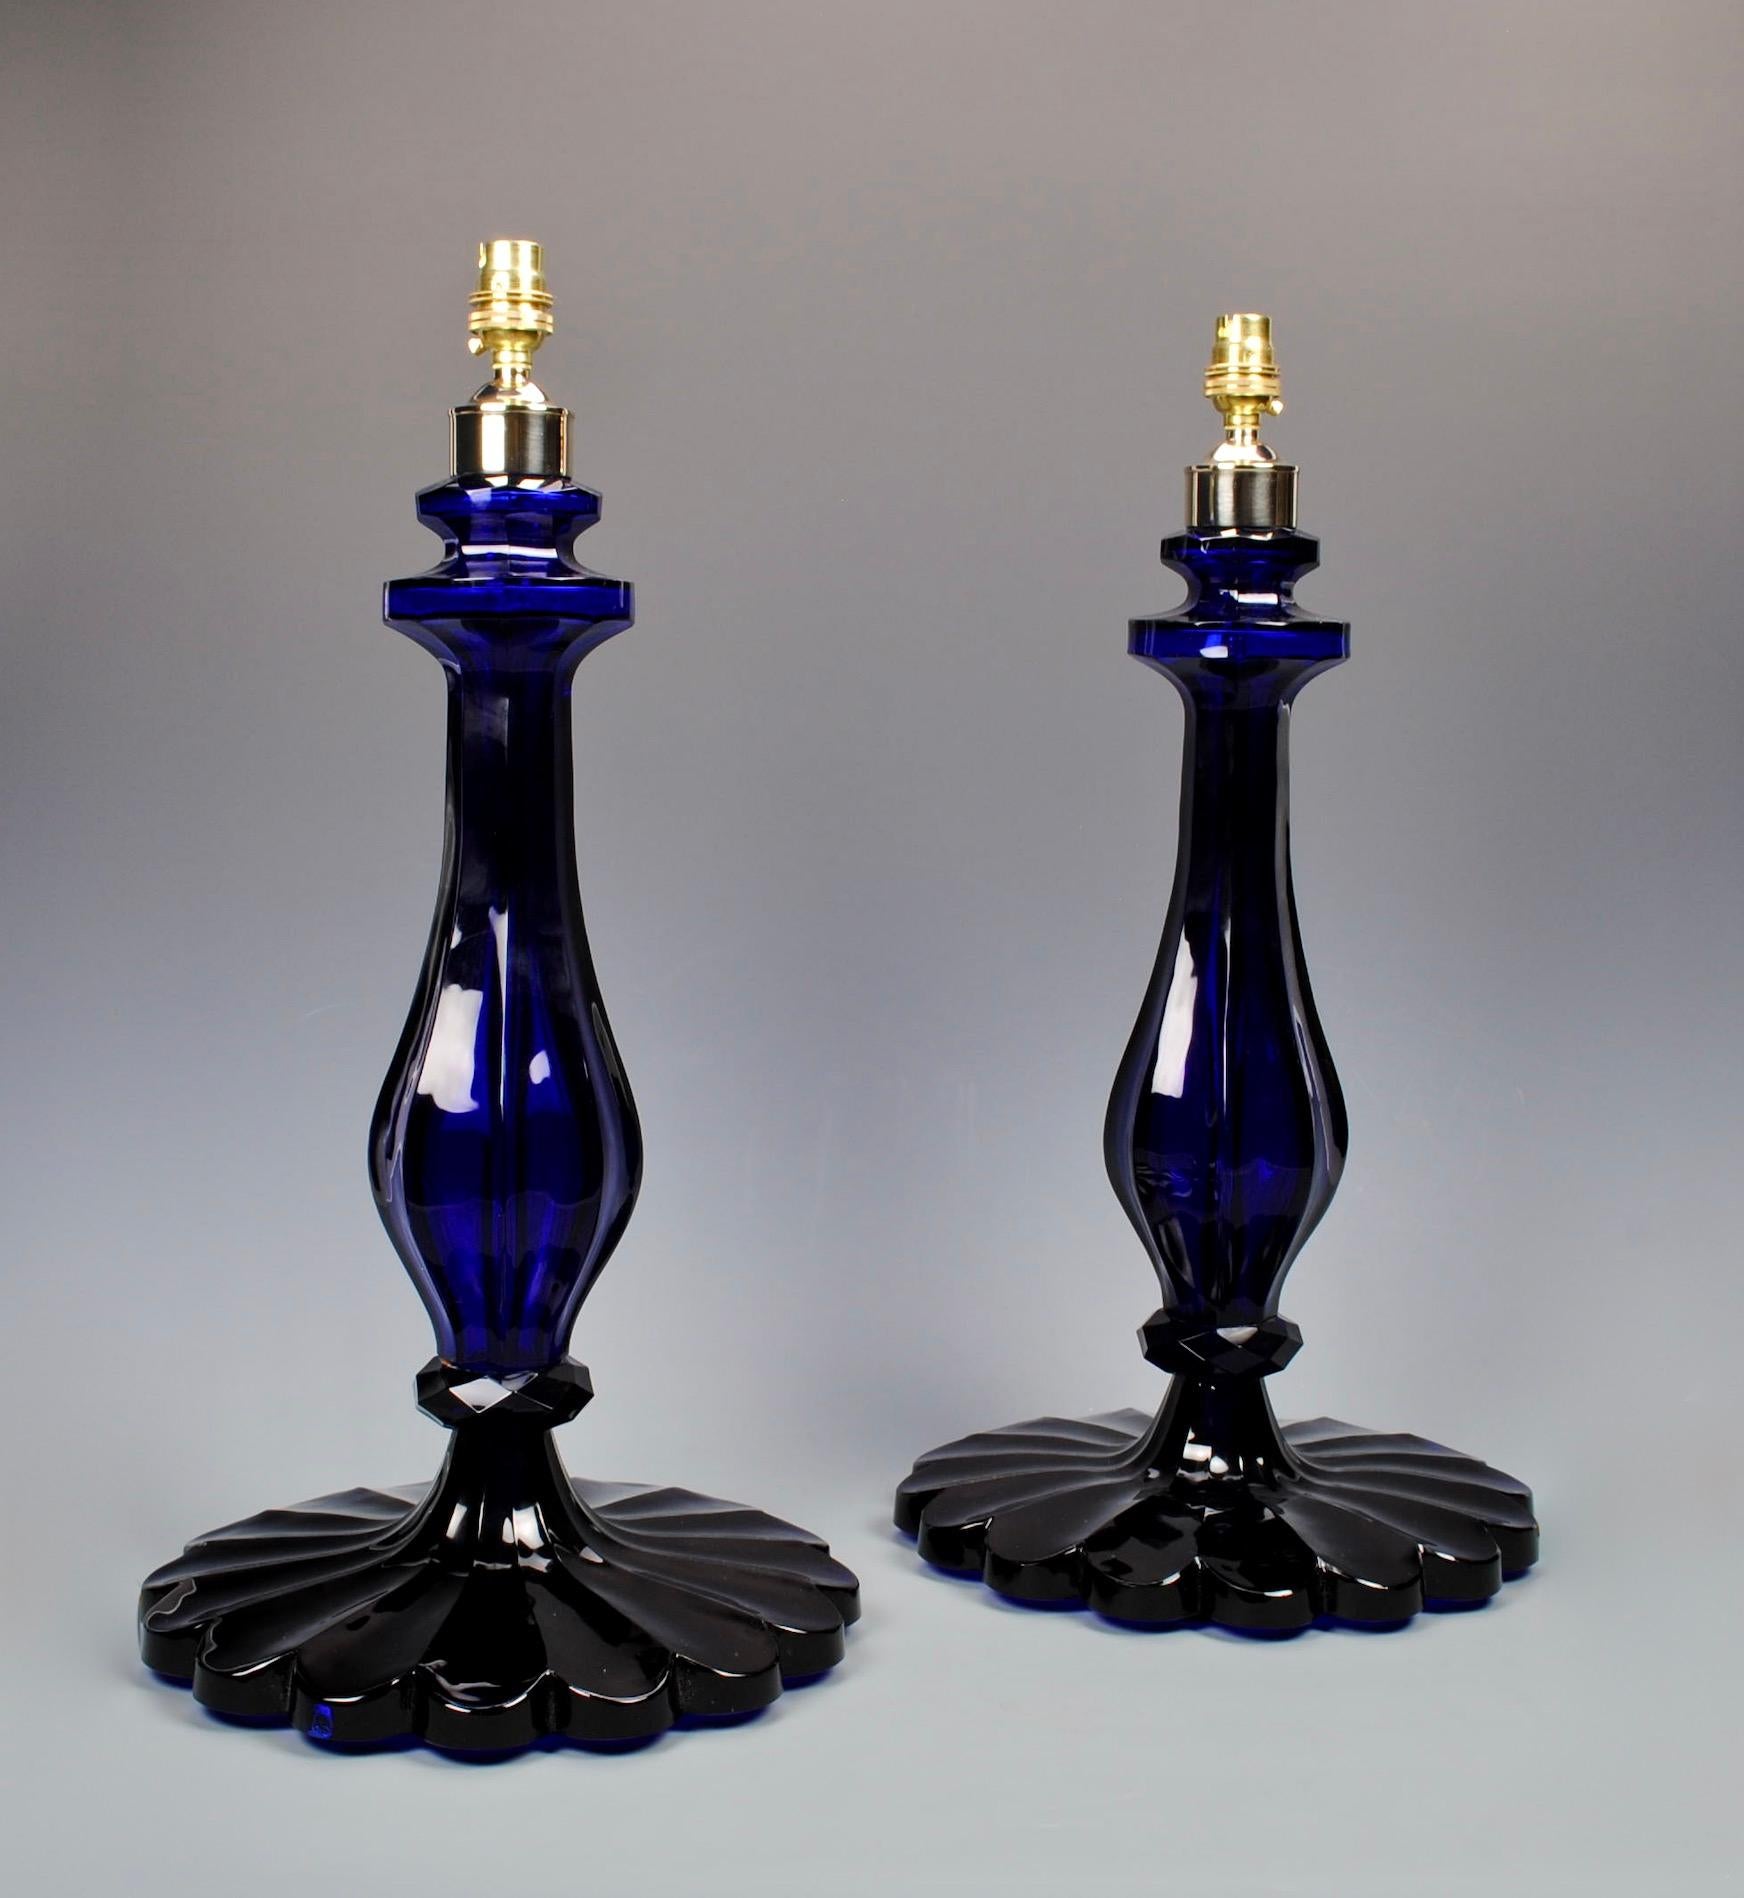 A superb pair of cobalt blue cut glass table lamps, each with moulded faceted baluster stems, and scalloped base.

Height: 19 in (48.5 cm) excluding electrical fitments and lampshades.

All of our lamps can be wired for use worldwide. A